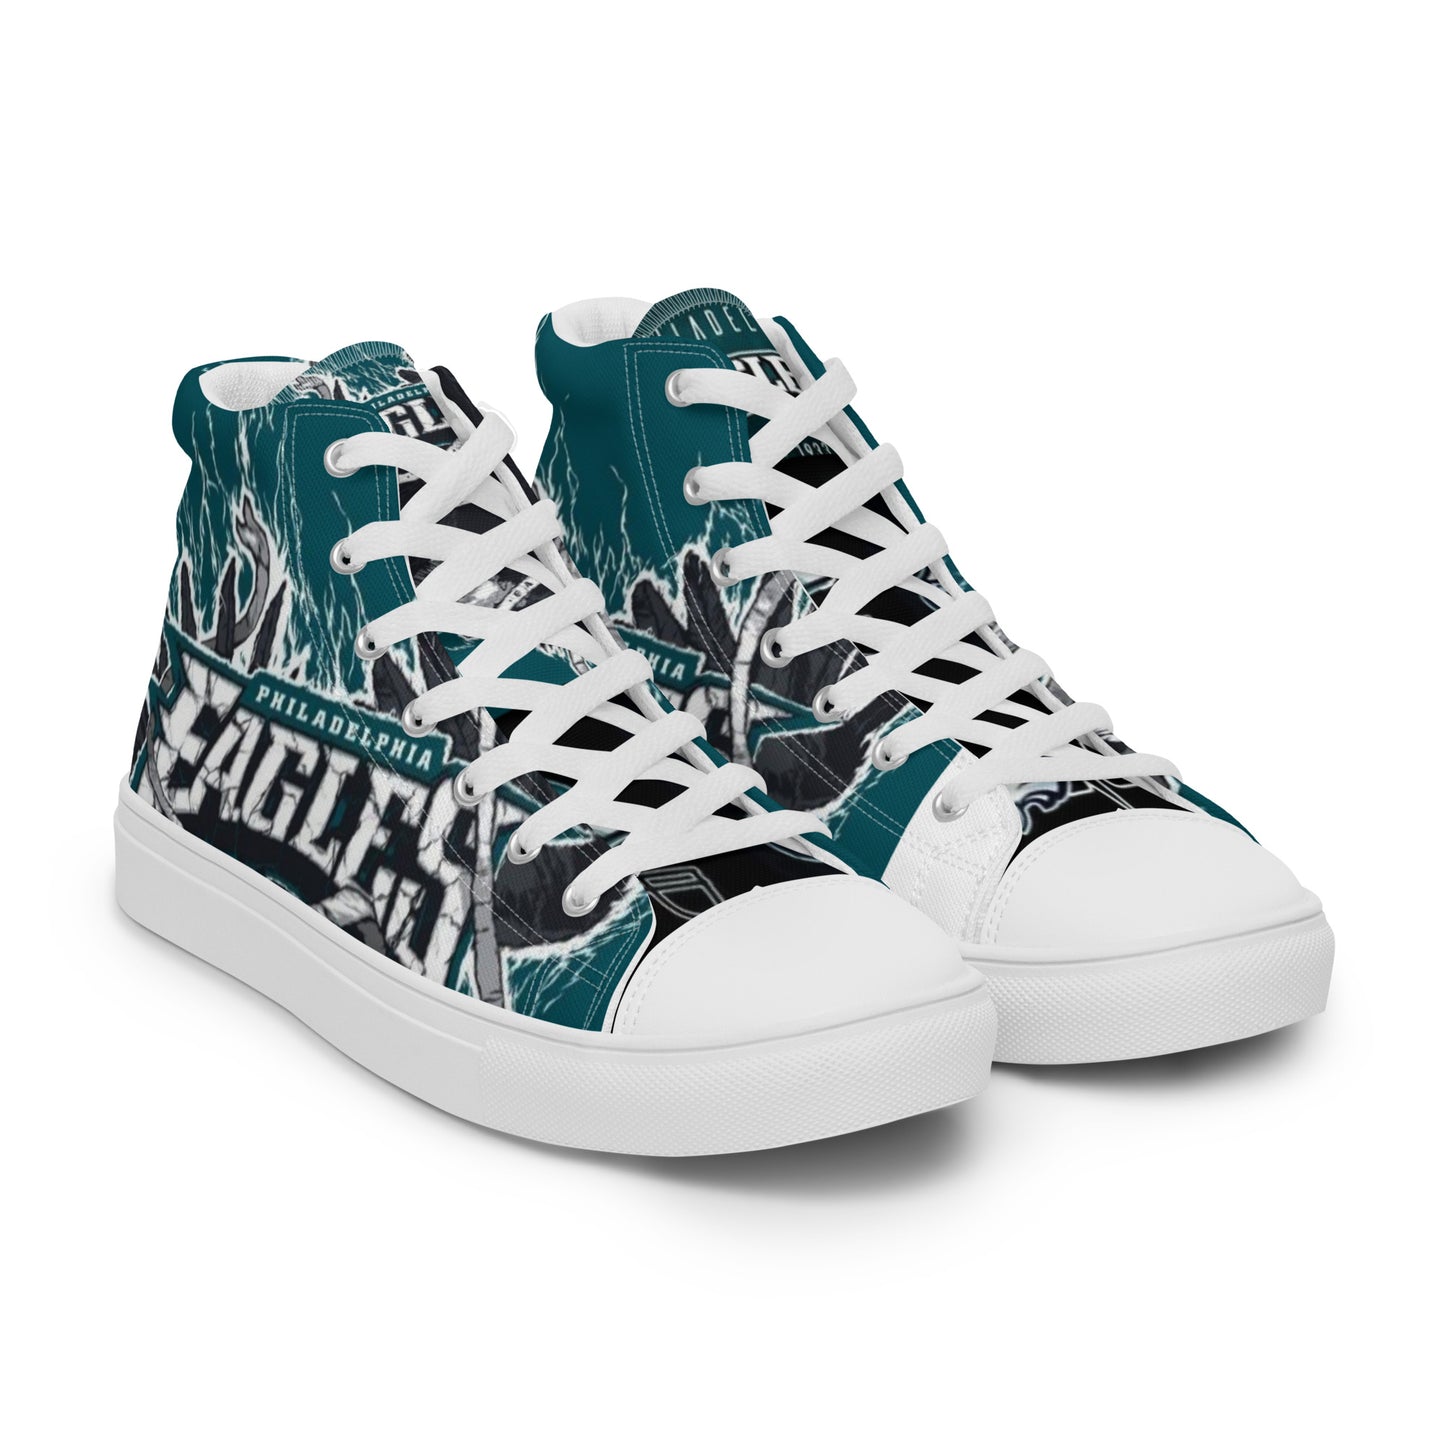 Men’s Philly High top canvas sneakers